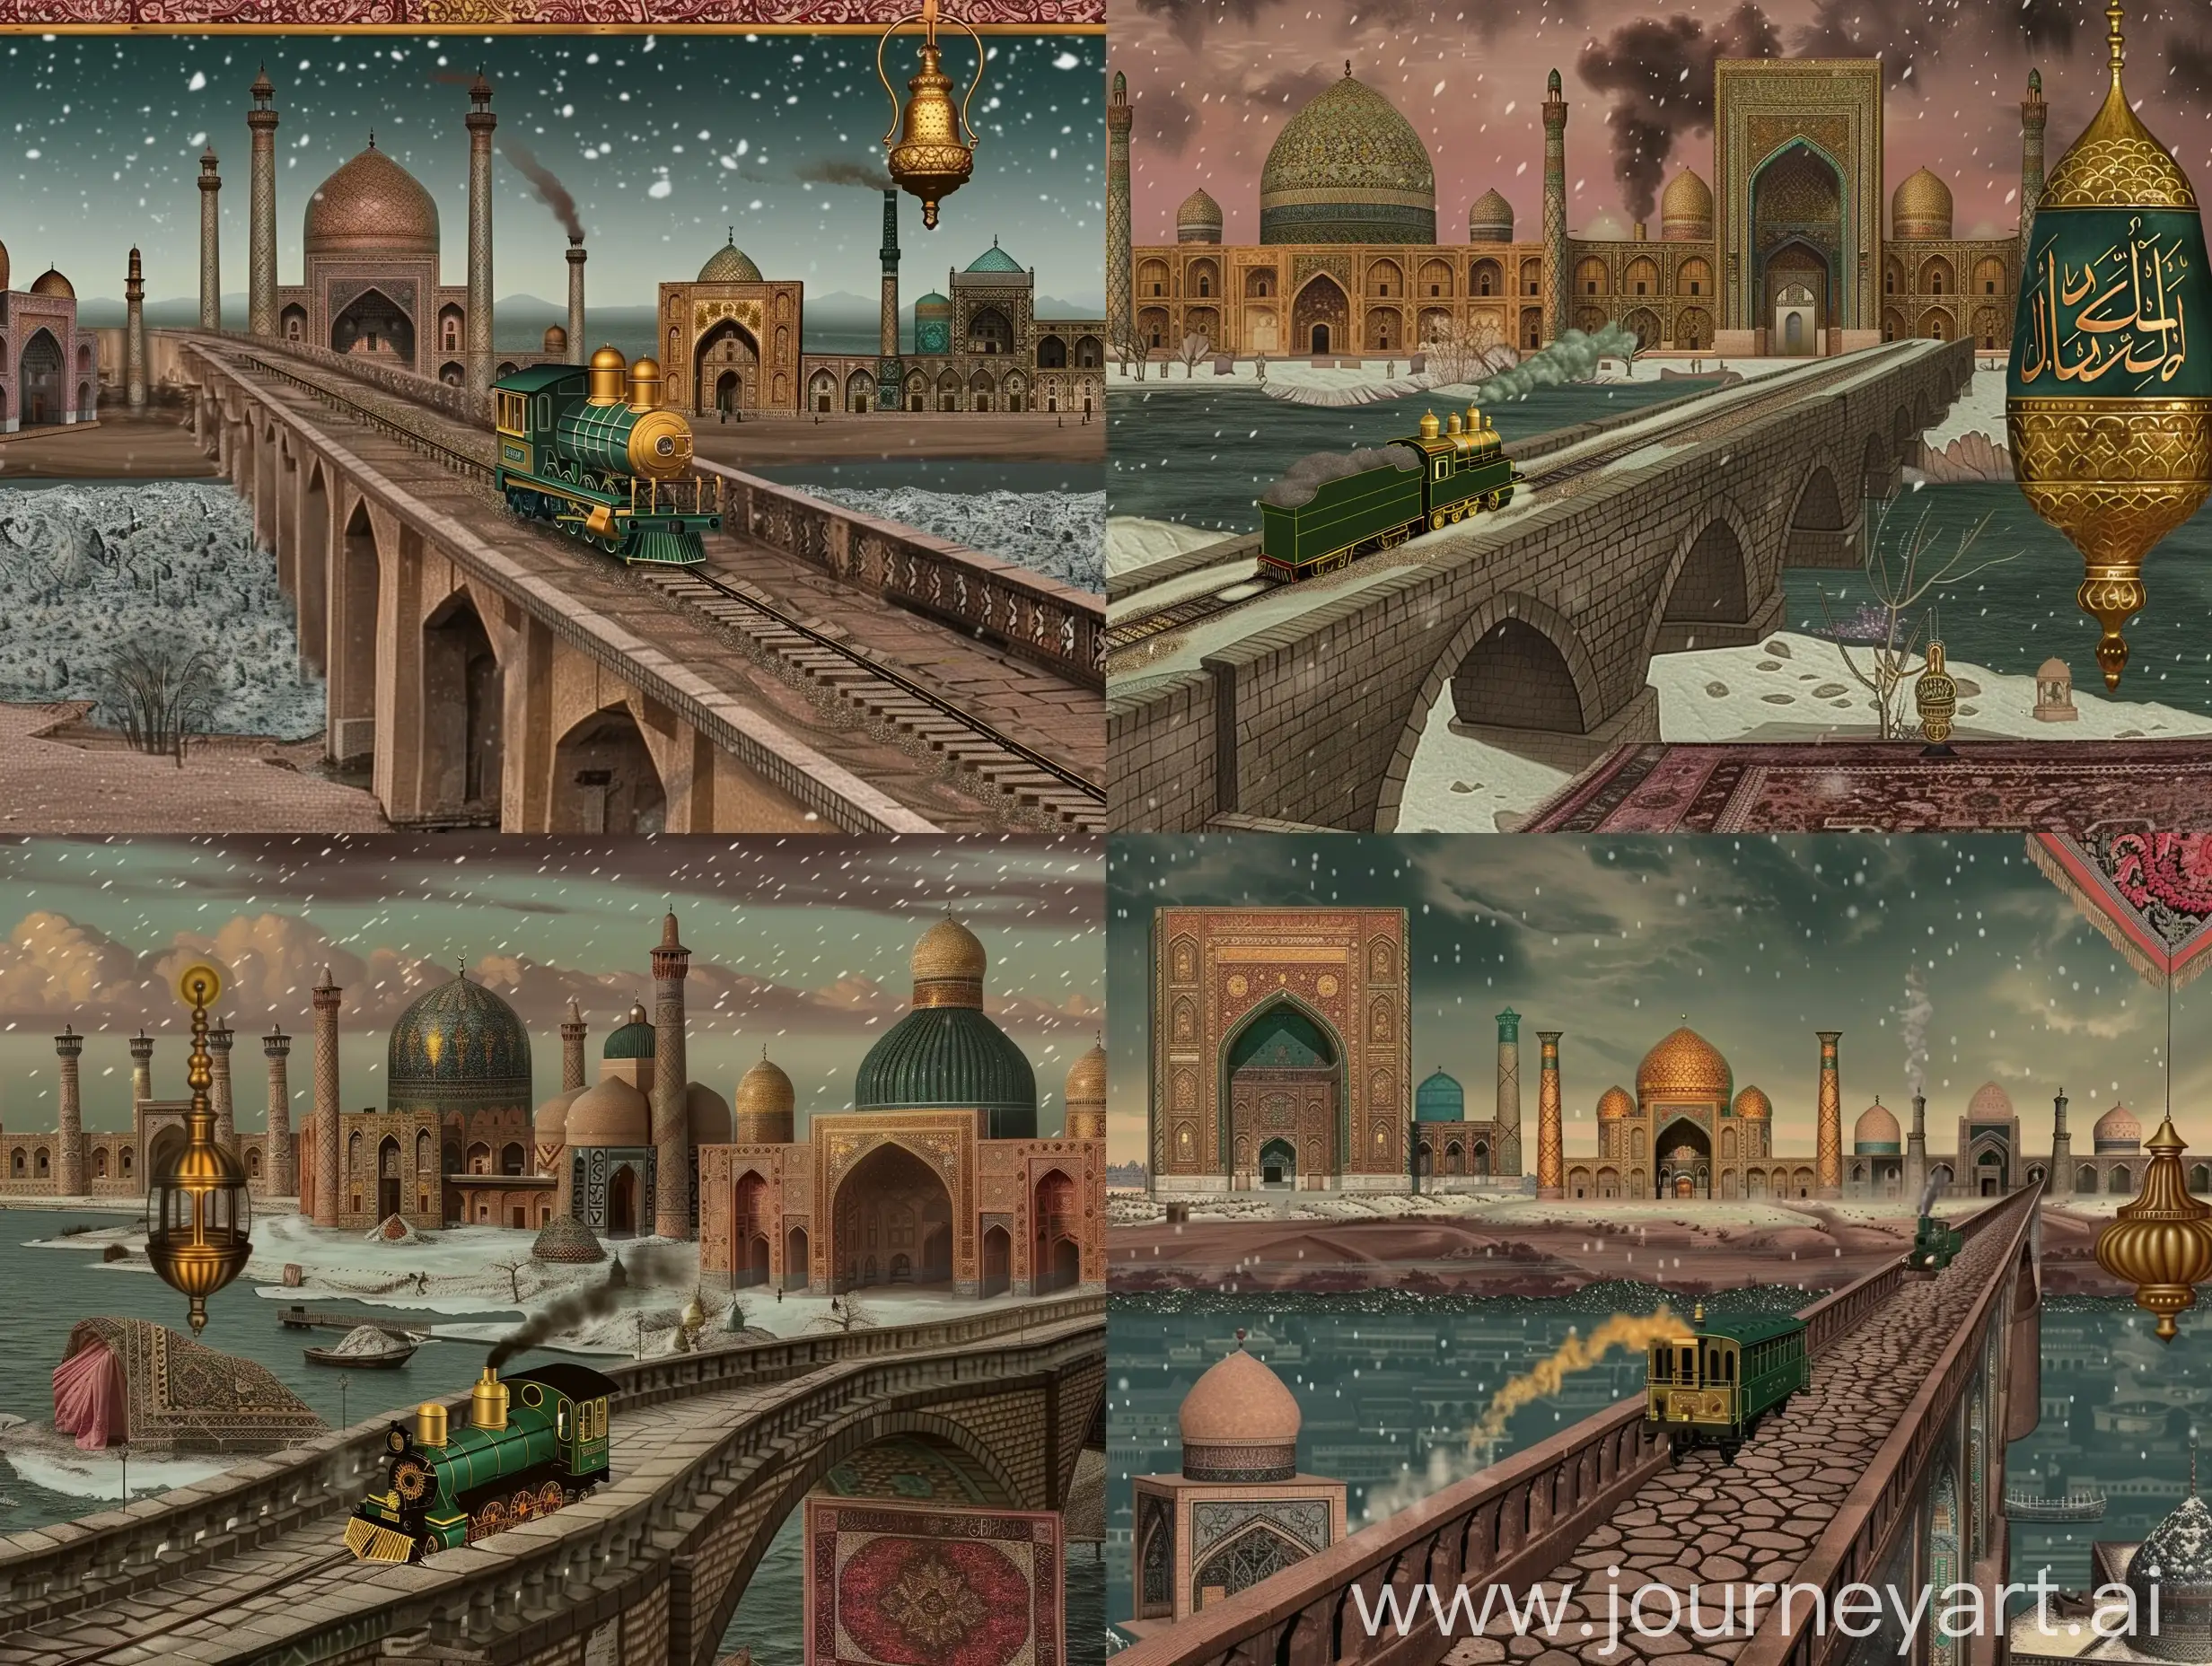 Cinematic photo: A stonebridge going towards into a seafront city, a green golden steam engine train moving on the bridge towards the middle of city, in the background is the wide seafront city full of Persian tiled Uzbekistan mosques and Isfahan mosque covered with persian tile exterior and gold ornaments, snowfall, a glorious islamic lamp hanging on side of the image --sref https://cdn.discordapp.com/attachments/1213041174428782623/1221526481126162483/IMG_20240212_124819.png?ex=6612e62f&is=6600712f&hm=599dc41d03548fb4c695a614b0da75670c313d8708f4036b5778b71f772ed9eb& --sw 999 --ar 4:3